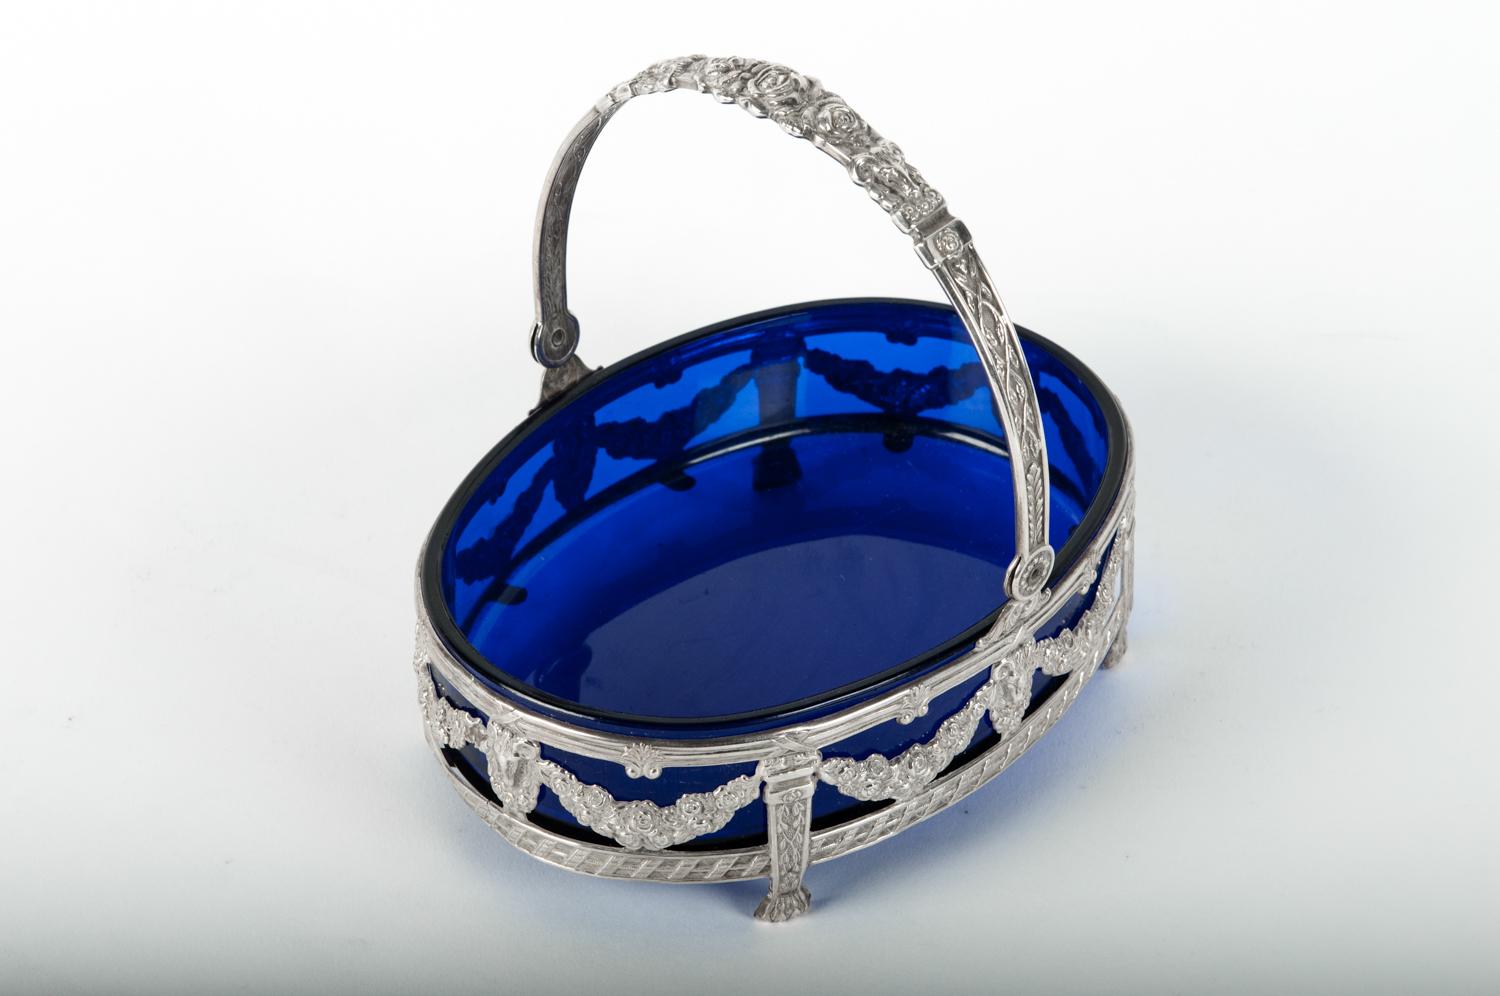 Old English sterling silver framed footed barware or tableware dish with cobalt blue glass liner. The piece is in great condition. Minor wear consistent with age or use. The dish stands about 6 inches high x 6.5 inches diameter.